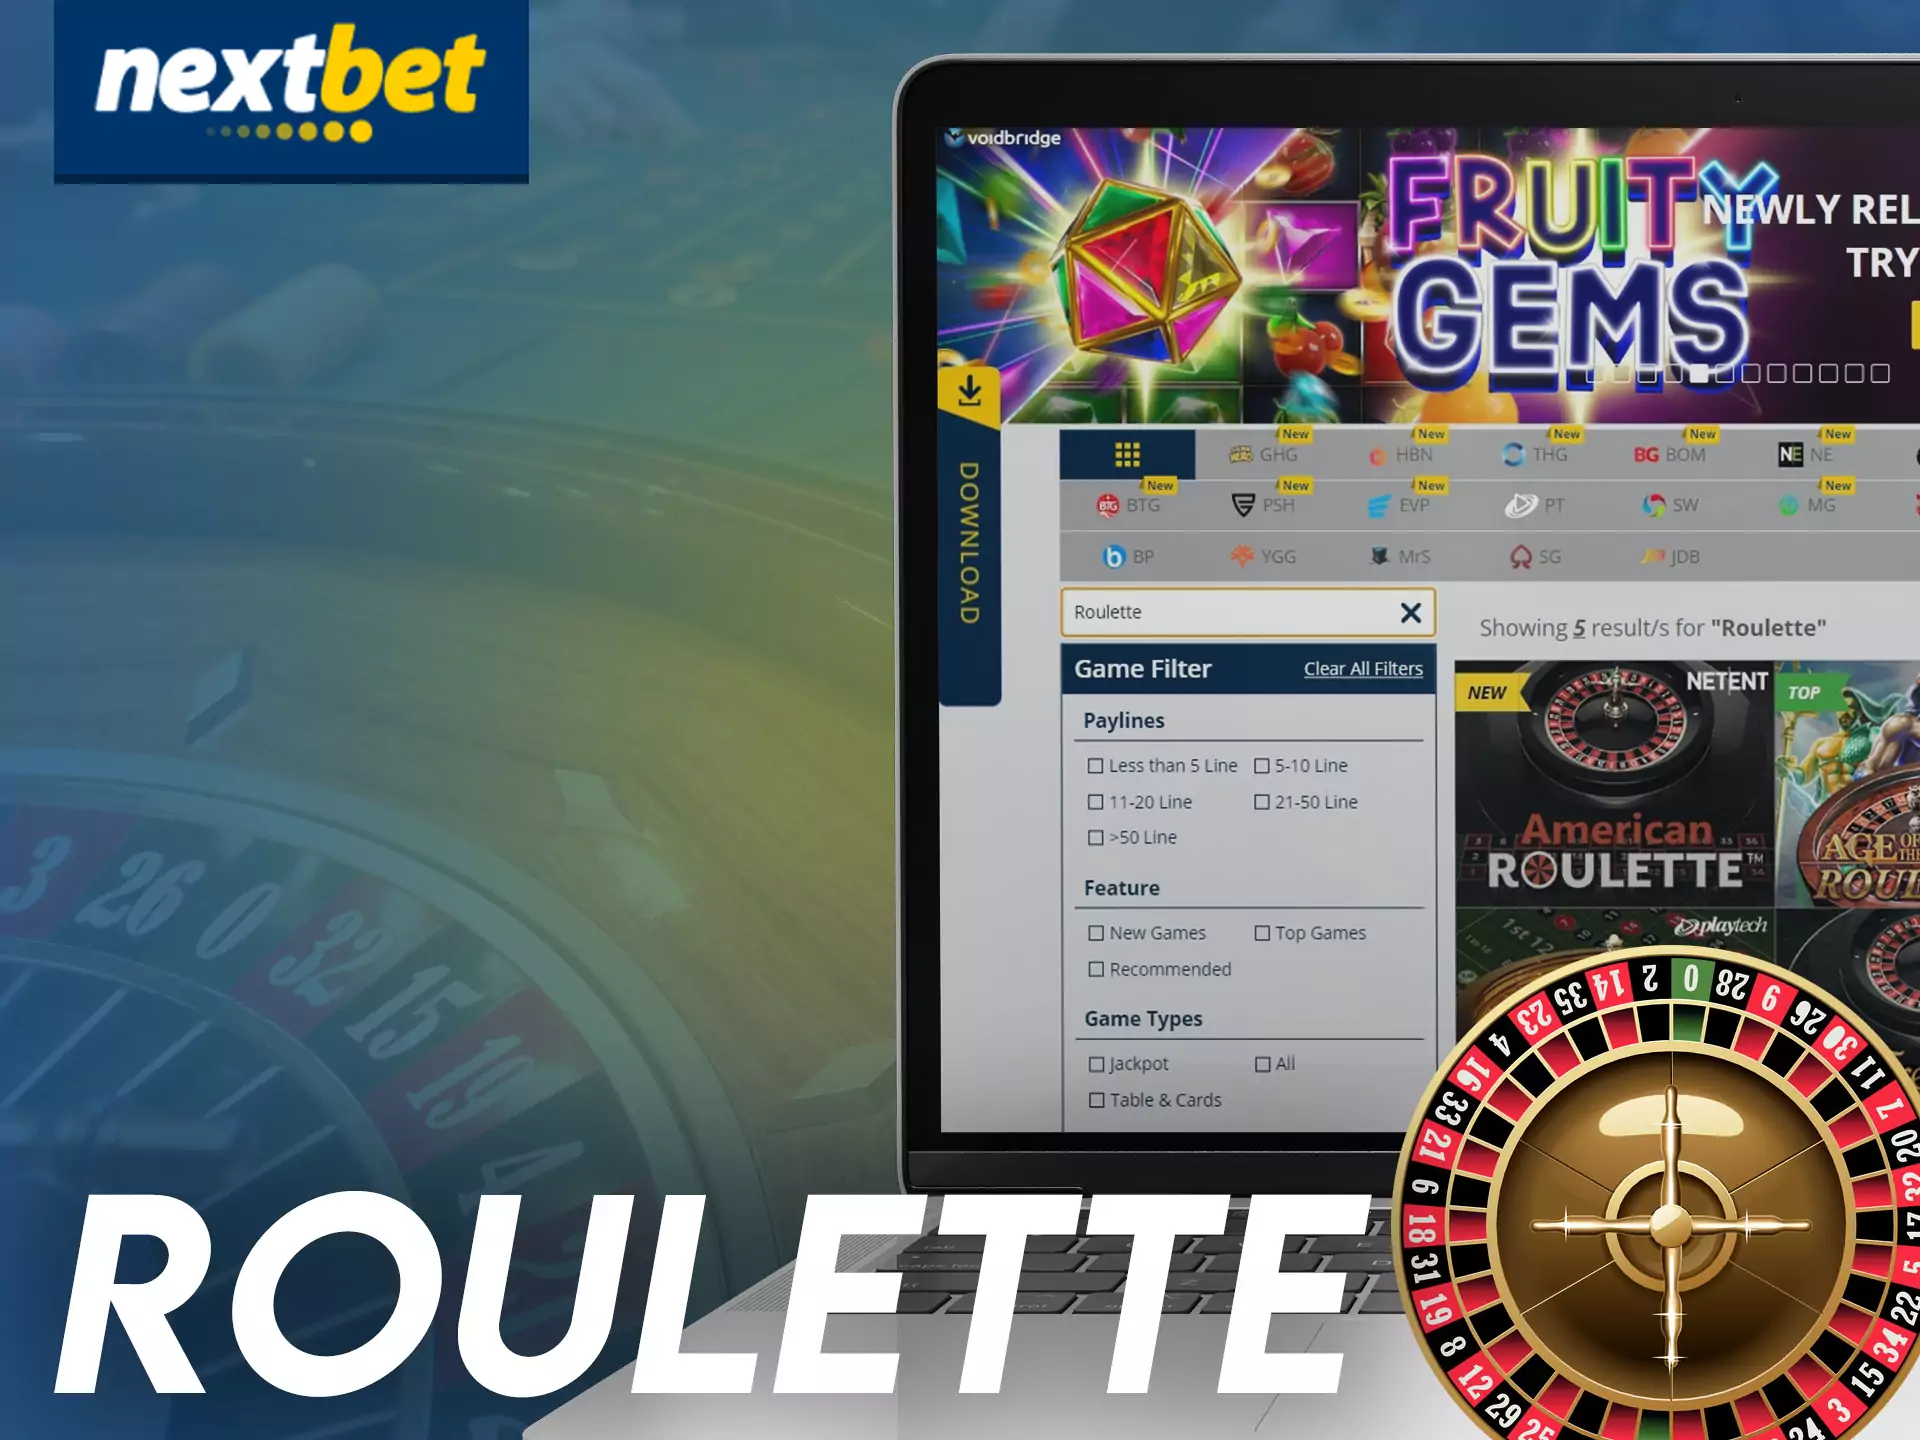 Bet on your luck at roulette at Nextbet Casino.